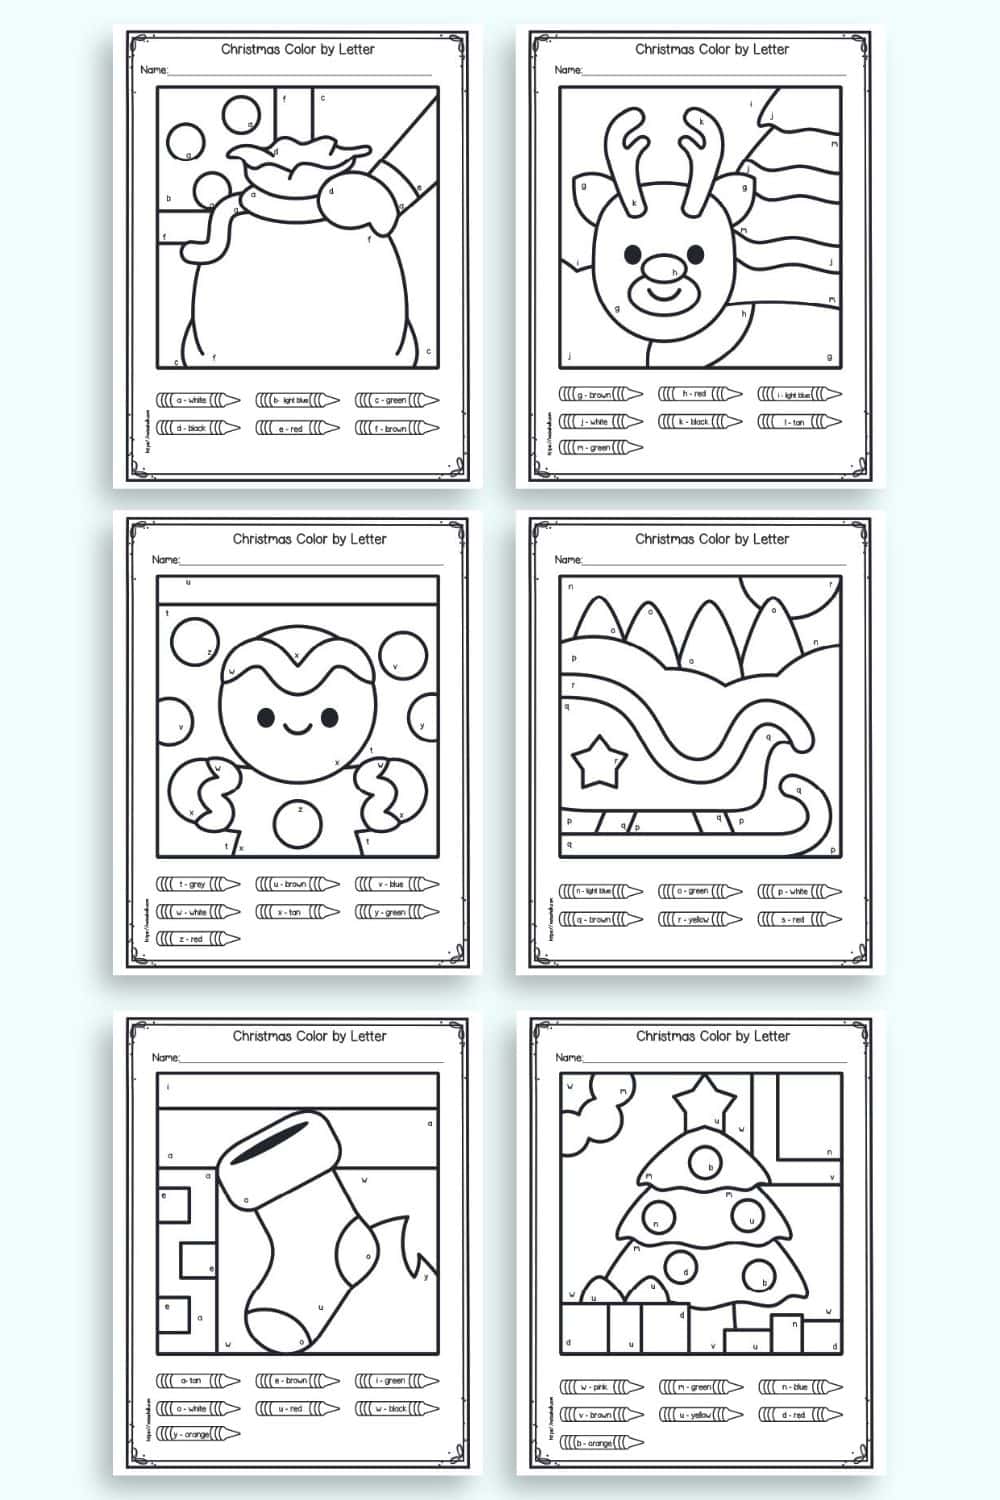 A preview of six Christmas themed color by letter worksheets for preschool and kindergarten.